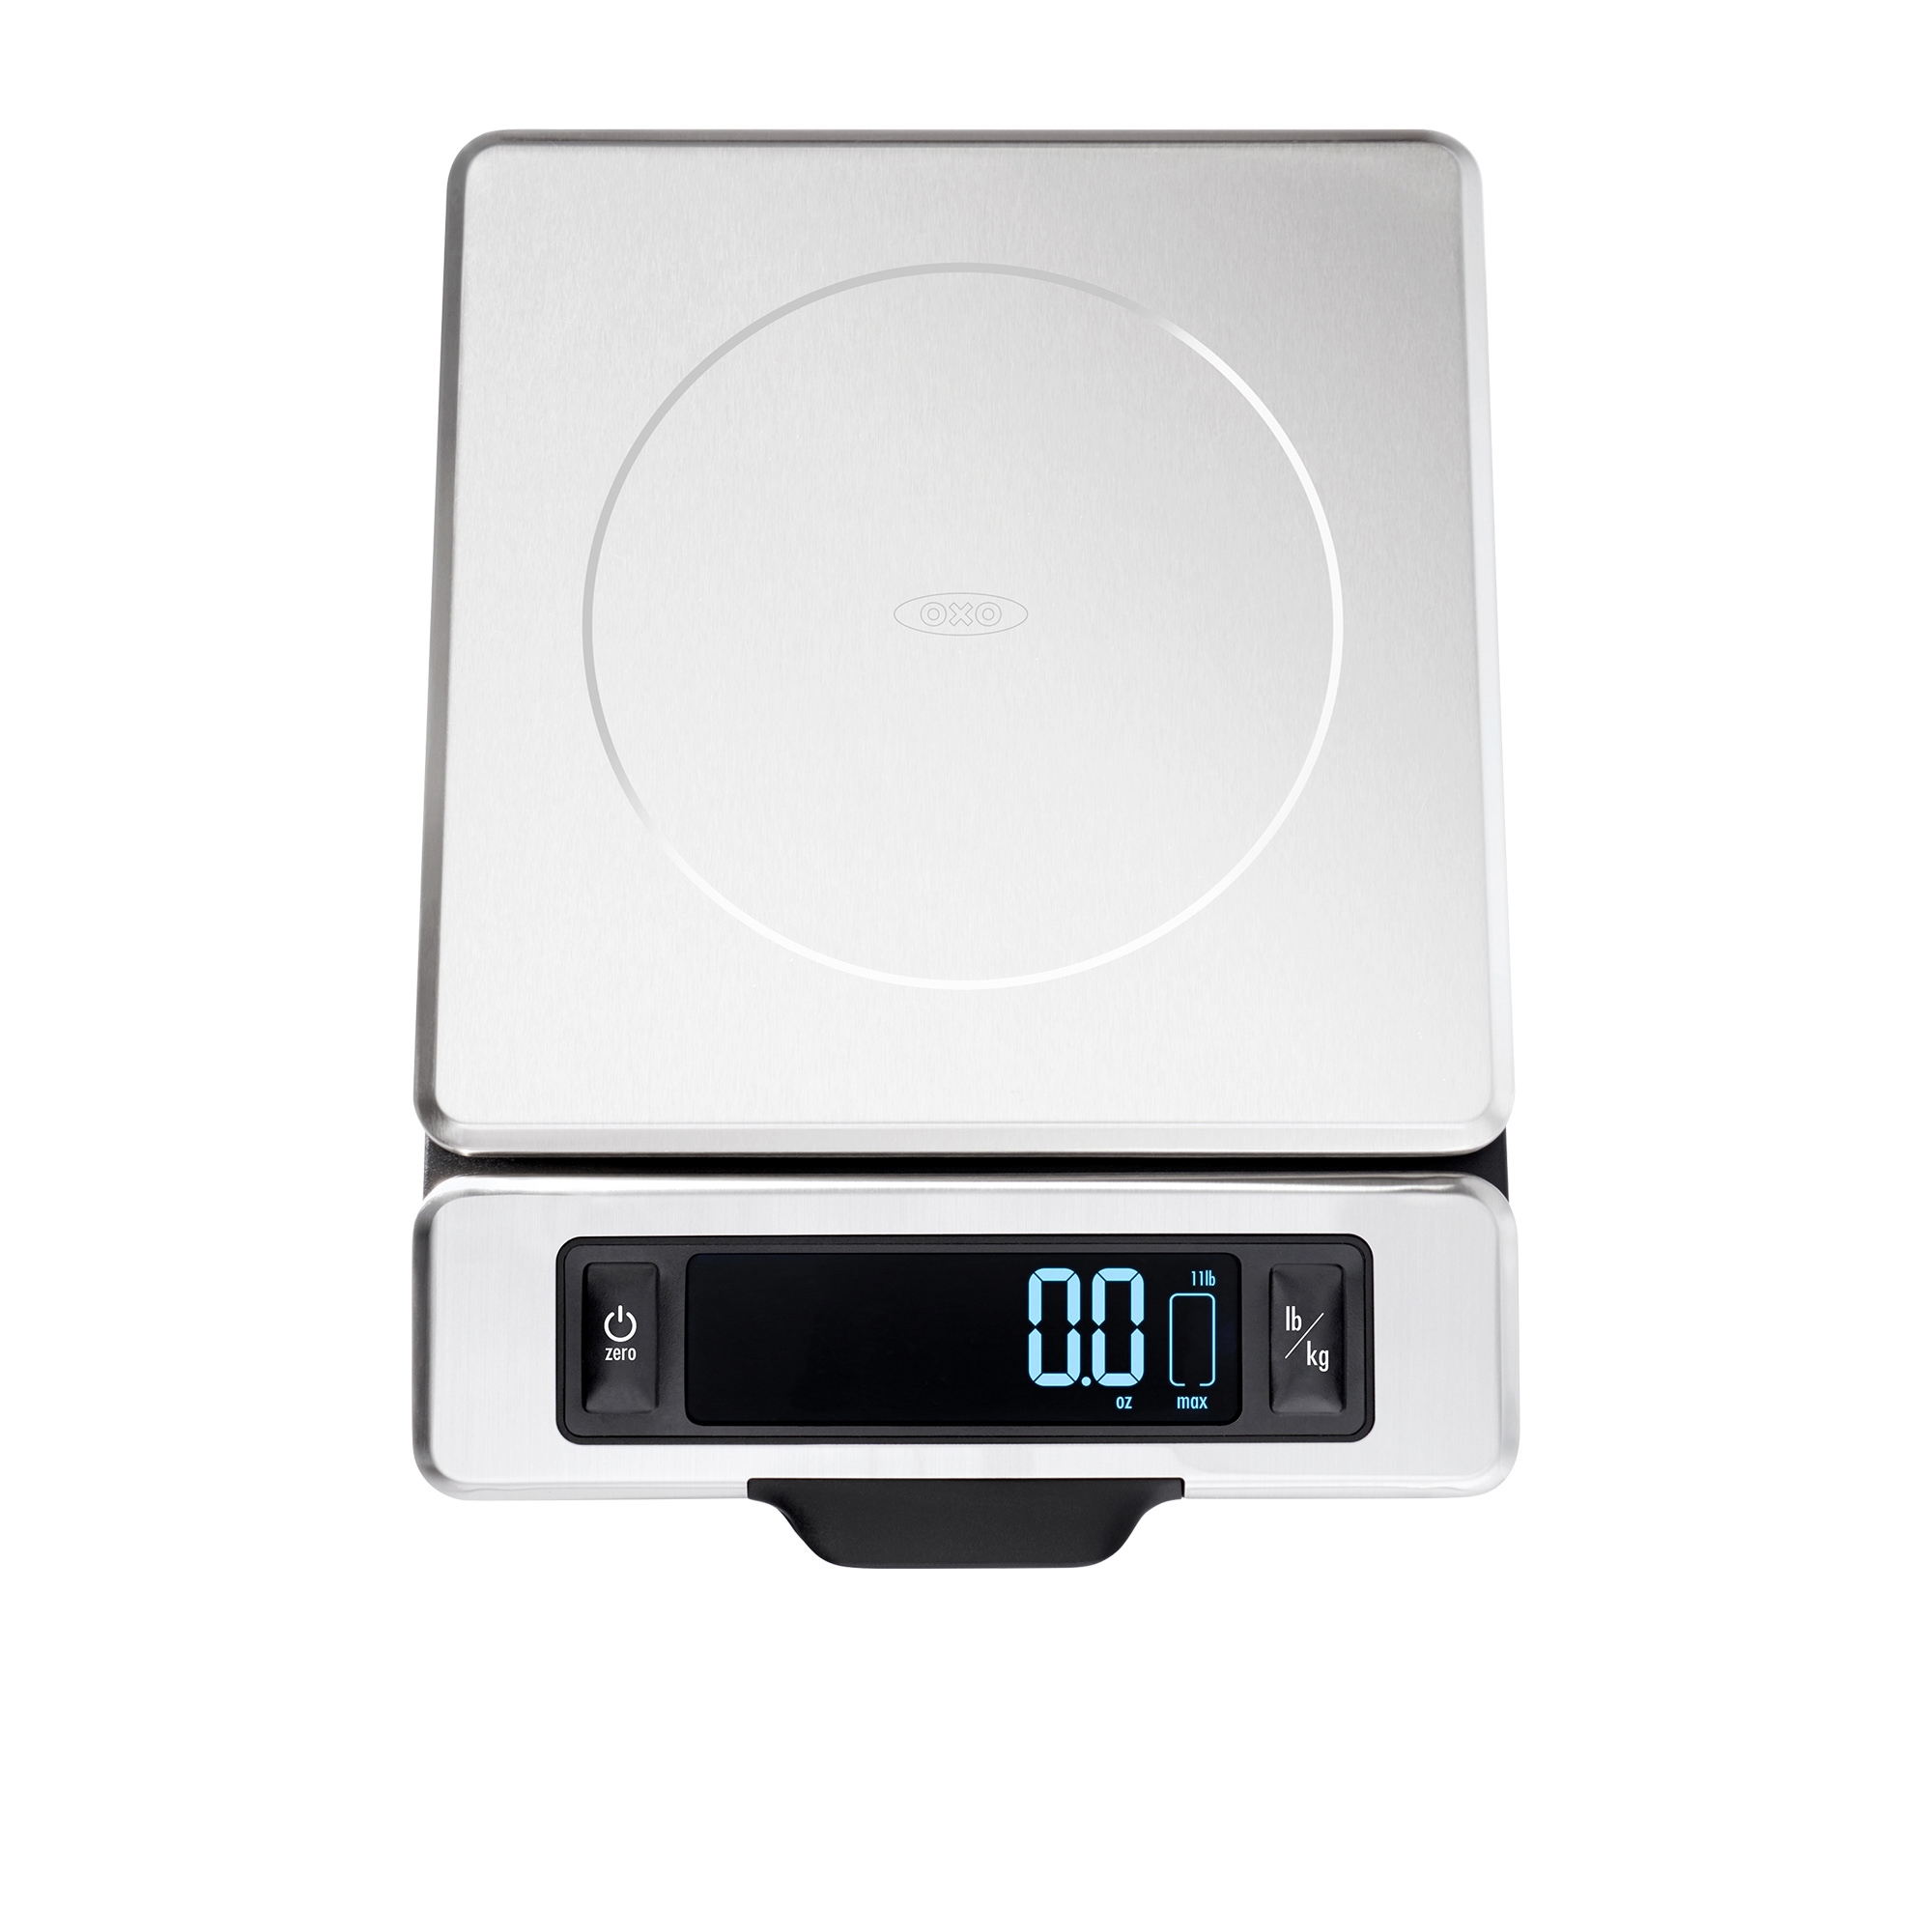 OXO Good Grips Stainless Steel Food Scale with Pull Out Display 5kg Image 1